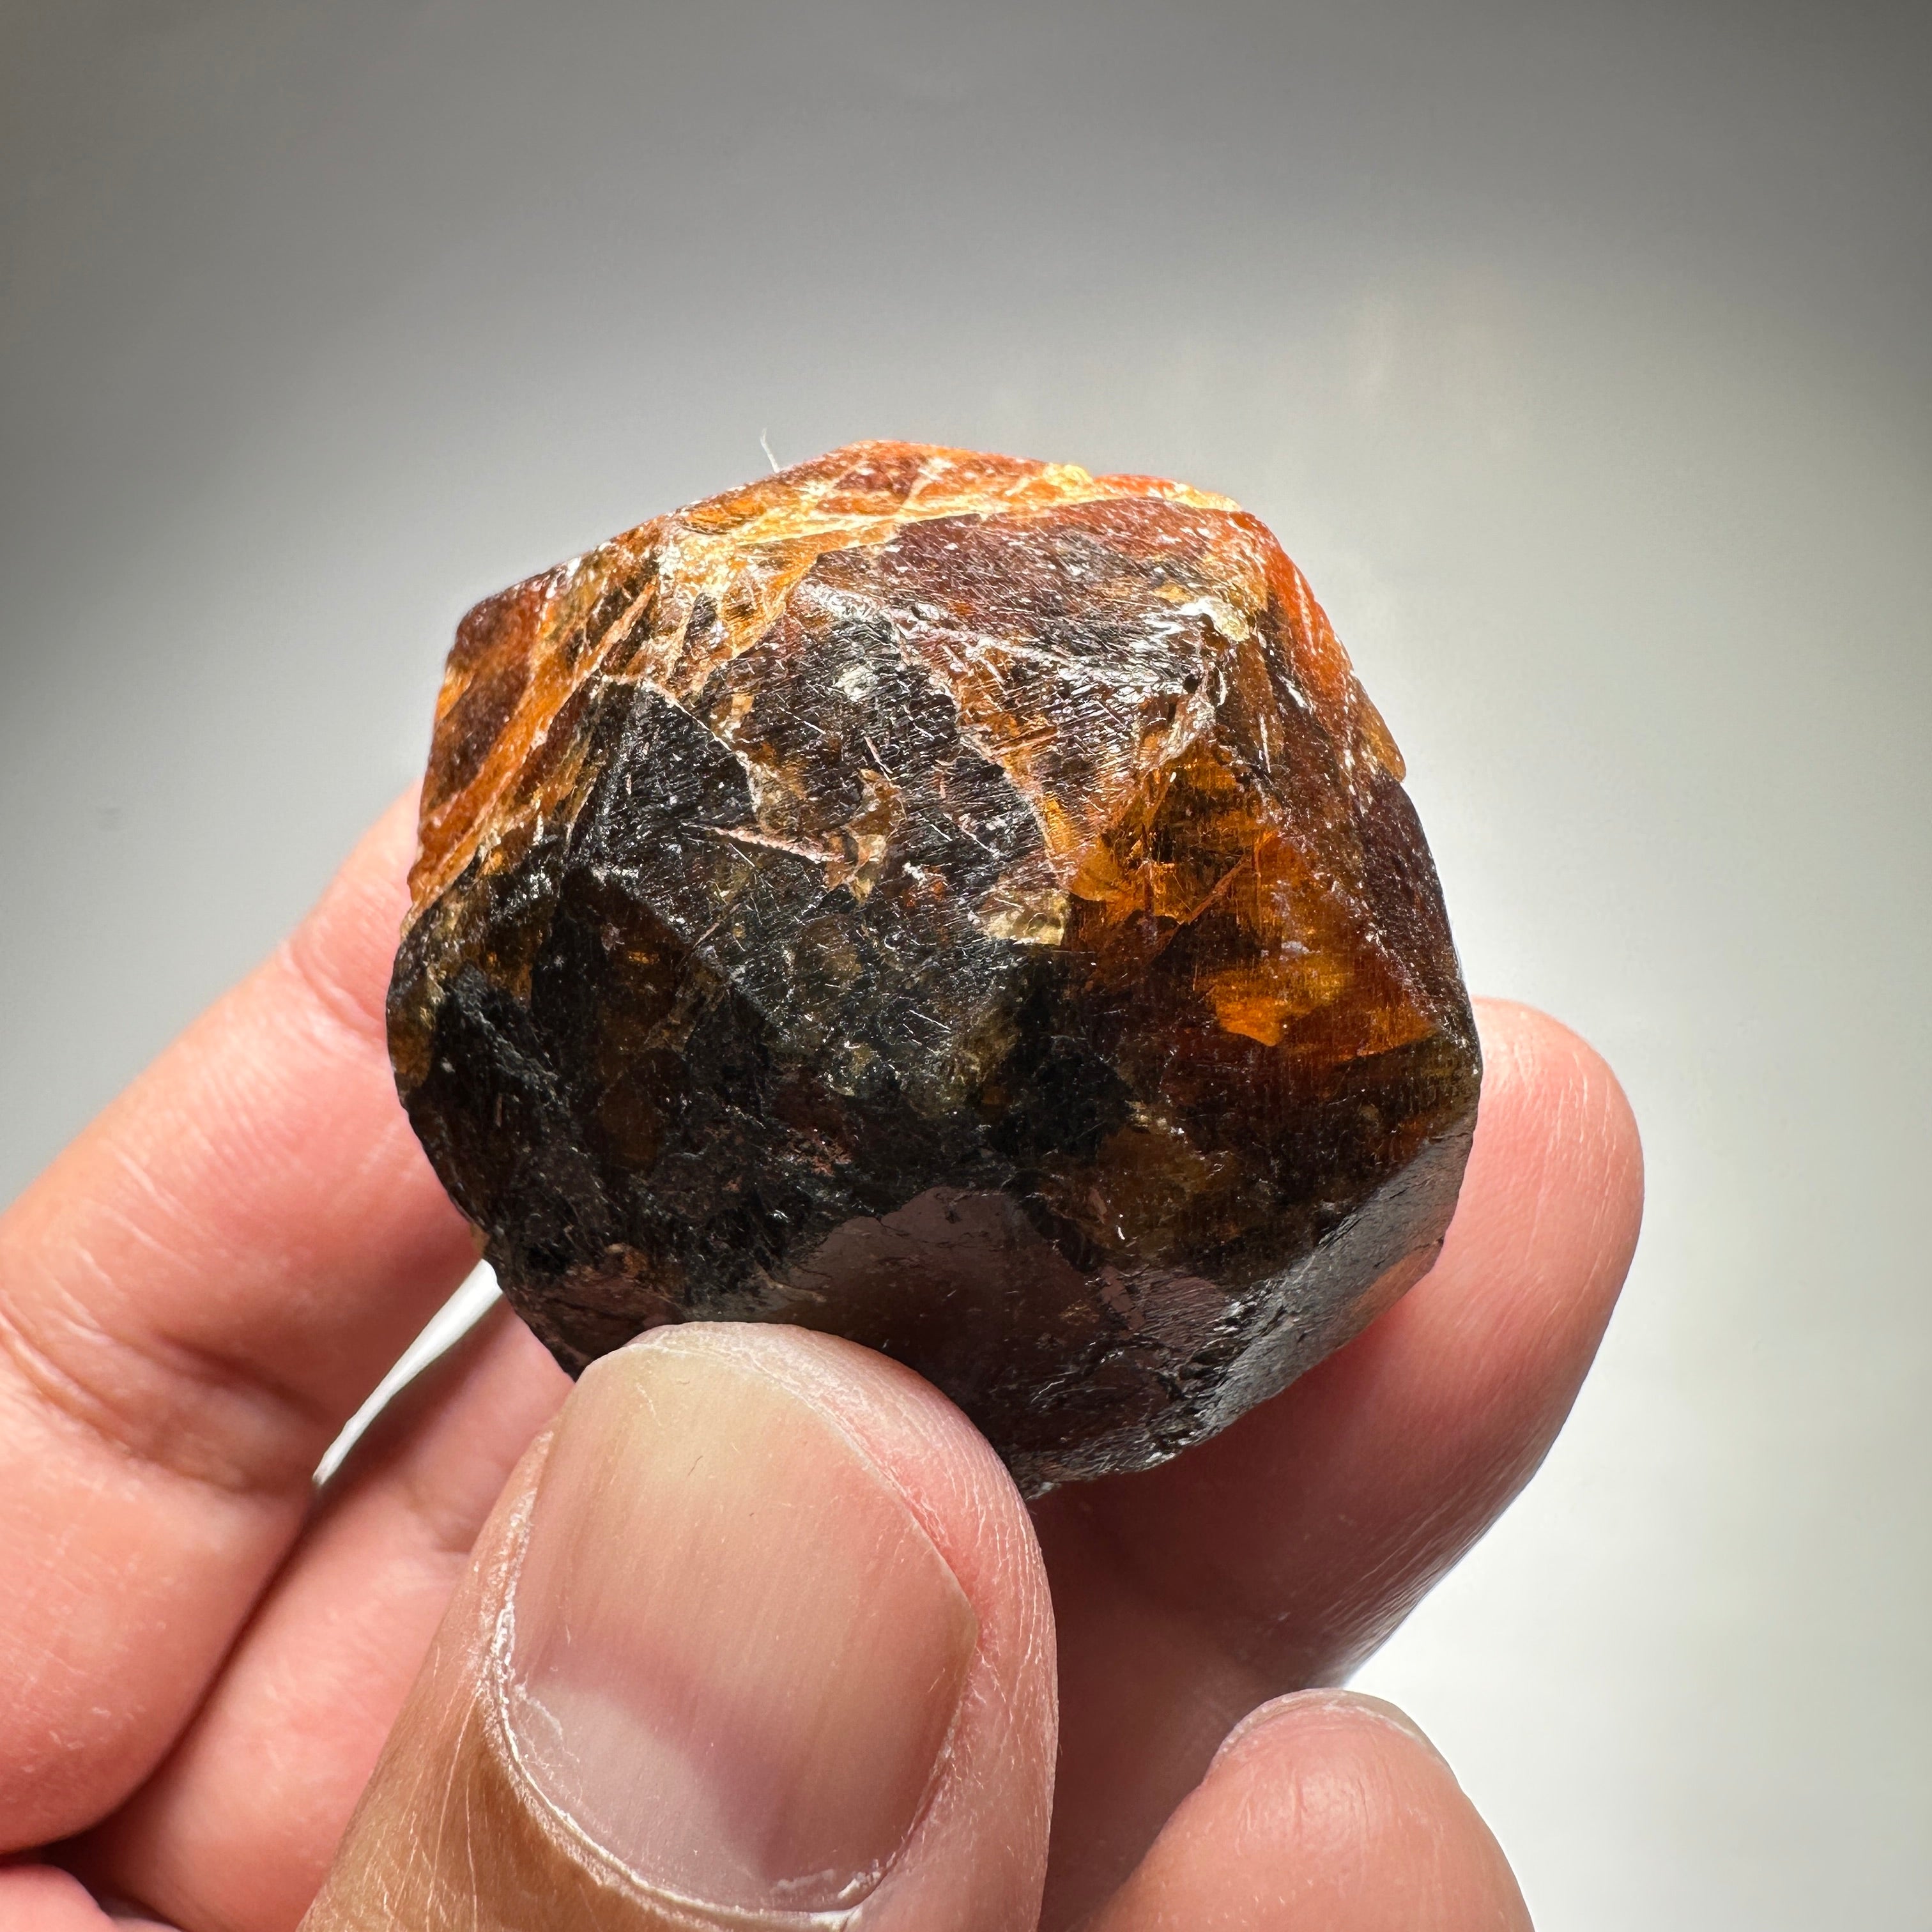 120gm / 600.00cts Large Mandarin Spessartite Garnet 41 X 38 X 38 mm, Untreated Unheated, Tanzania. Bit dark but is full of faceting grade portions see backlit photos, would normally have been broken for its faceting rough